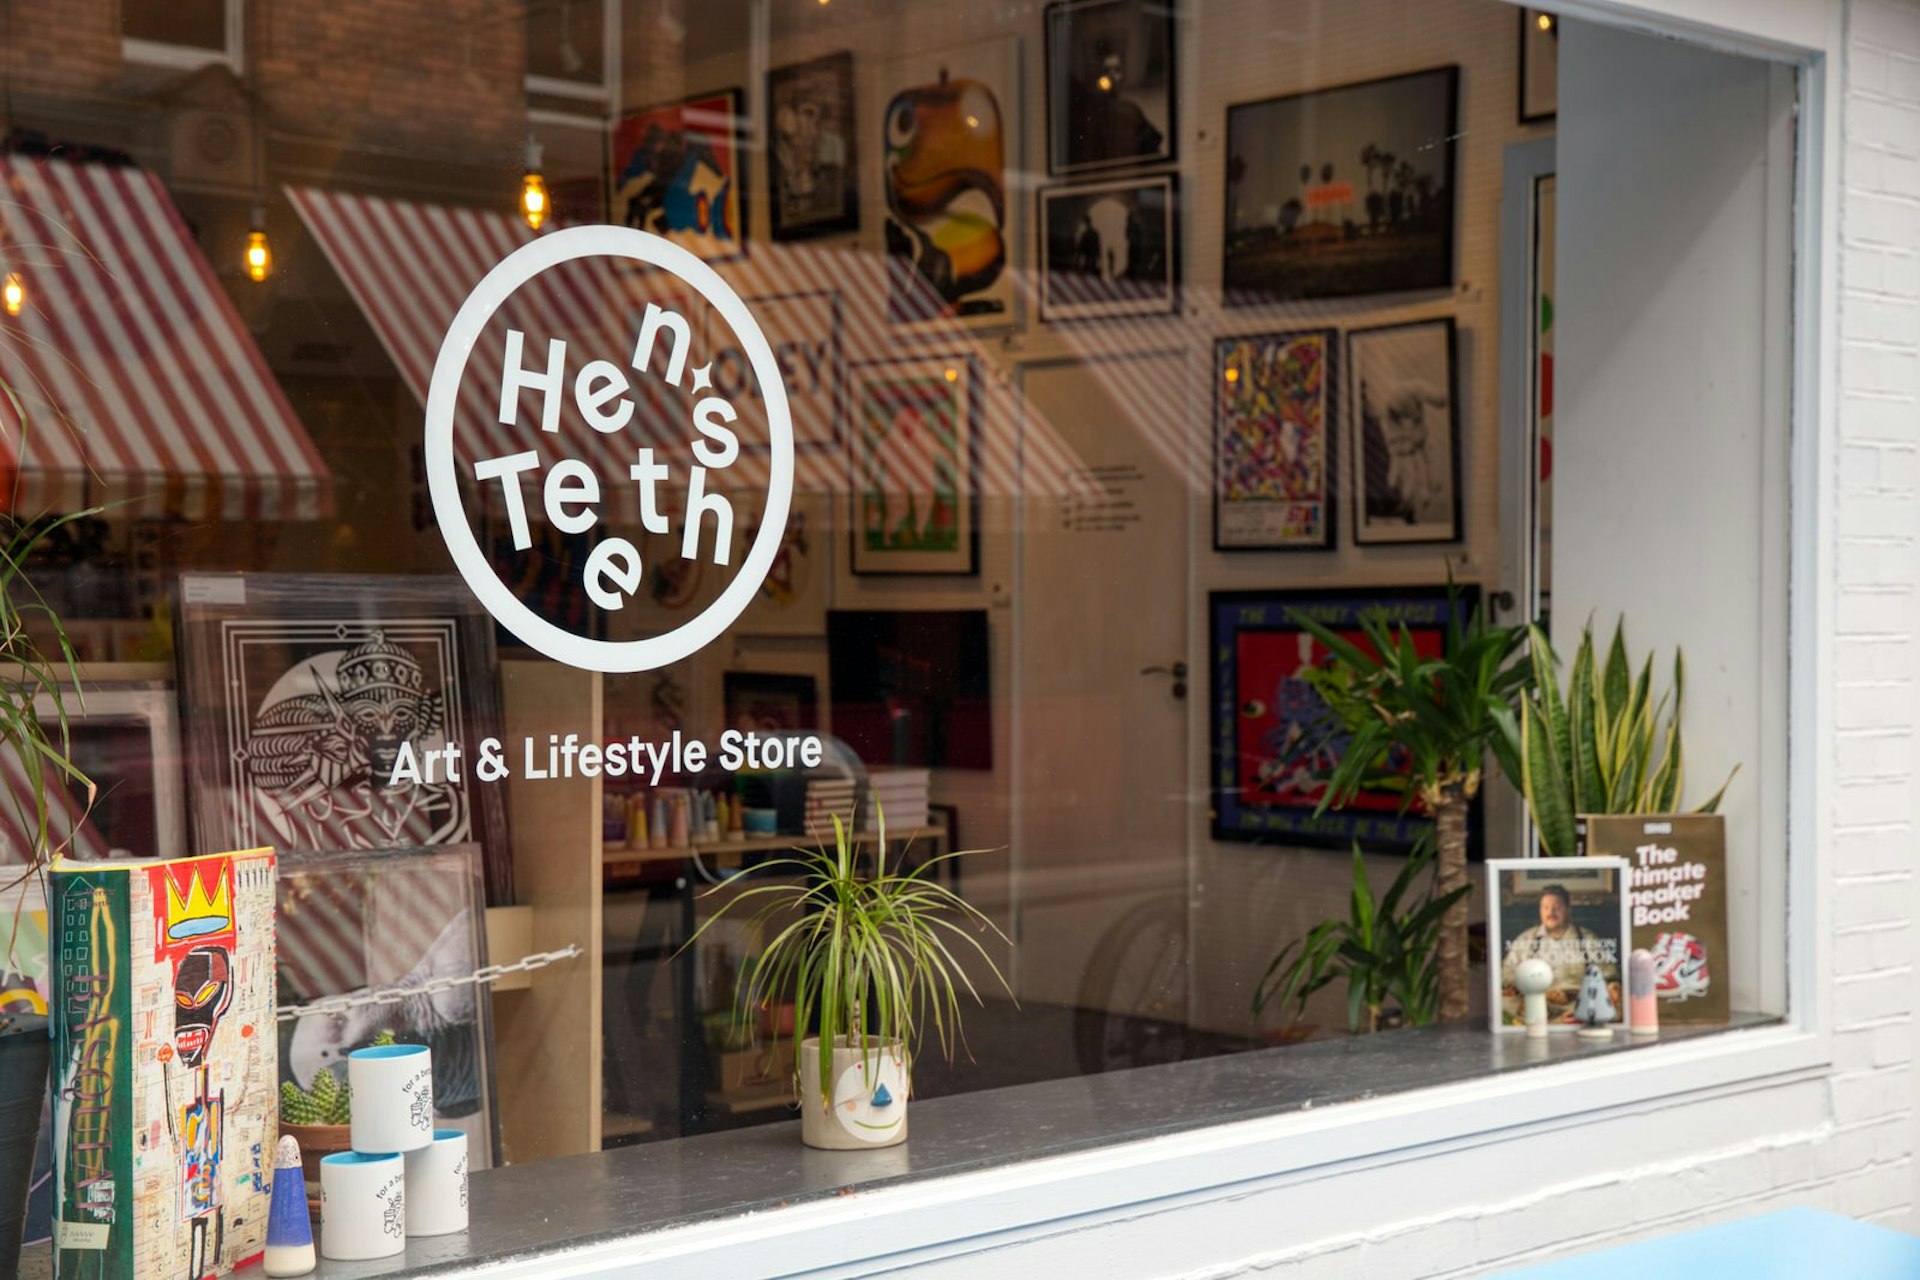 Dublin independent shops - Hen's Teeth shop front which is painted white with a large glass window featuring the Hen's Teeth logo. Behind the window we can see lots of framed artwork and some plants and candles